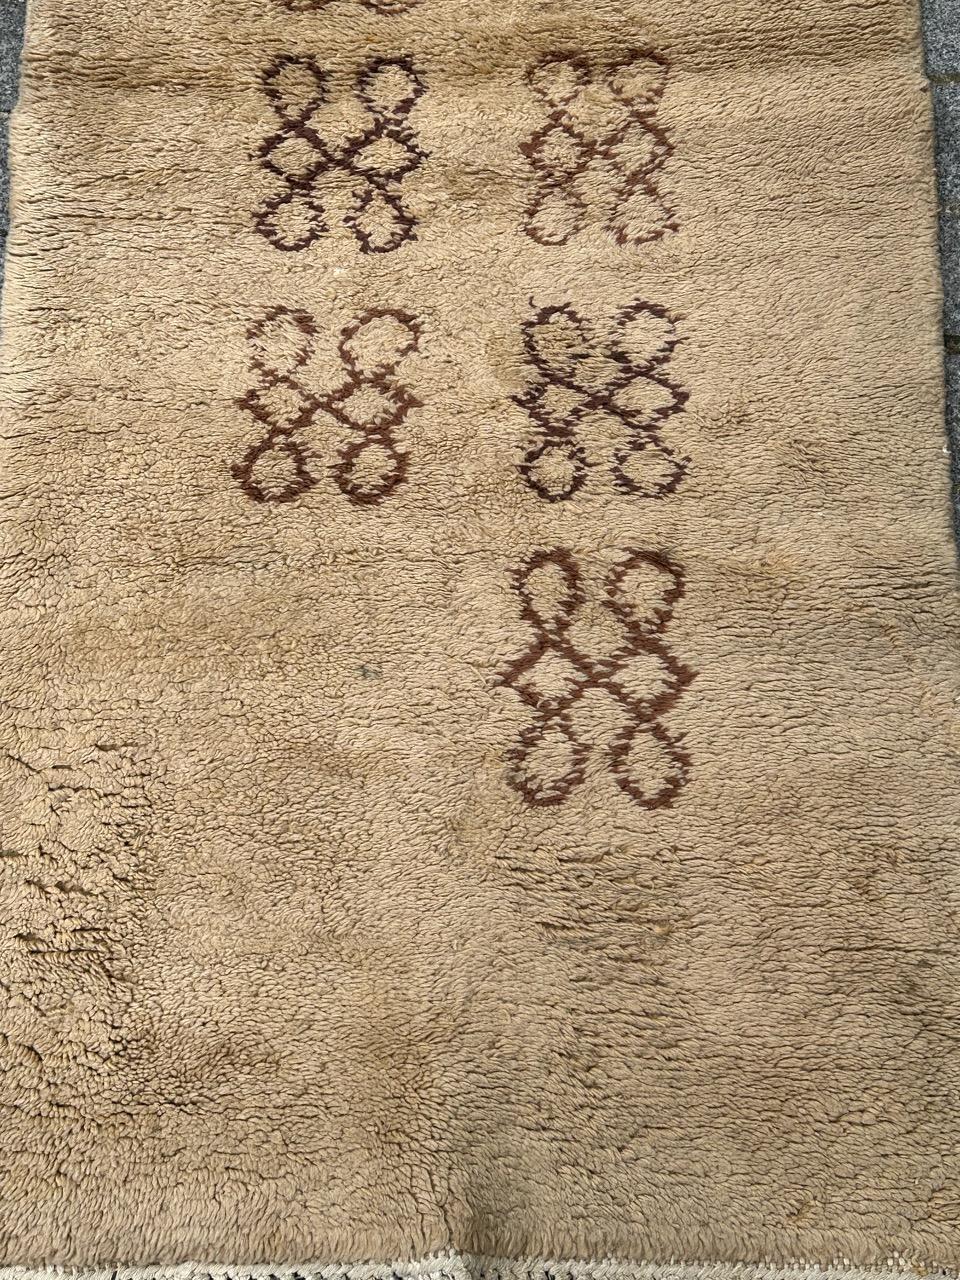 Nice art déco design Moroccan rug with beautiful simple design and nice colours with a light yellow field and brown in design, entirely hand knotted with wool on cotton foundation.

✨✨✨
